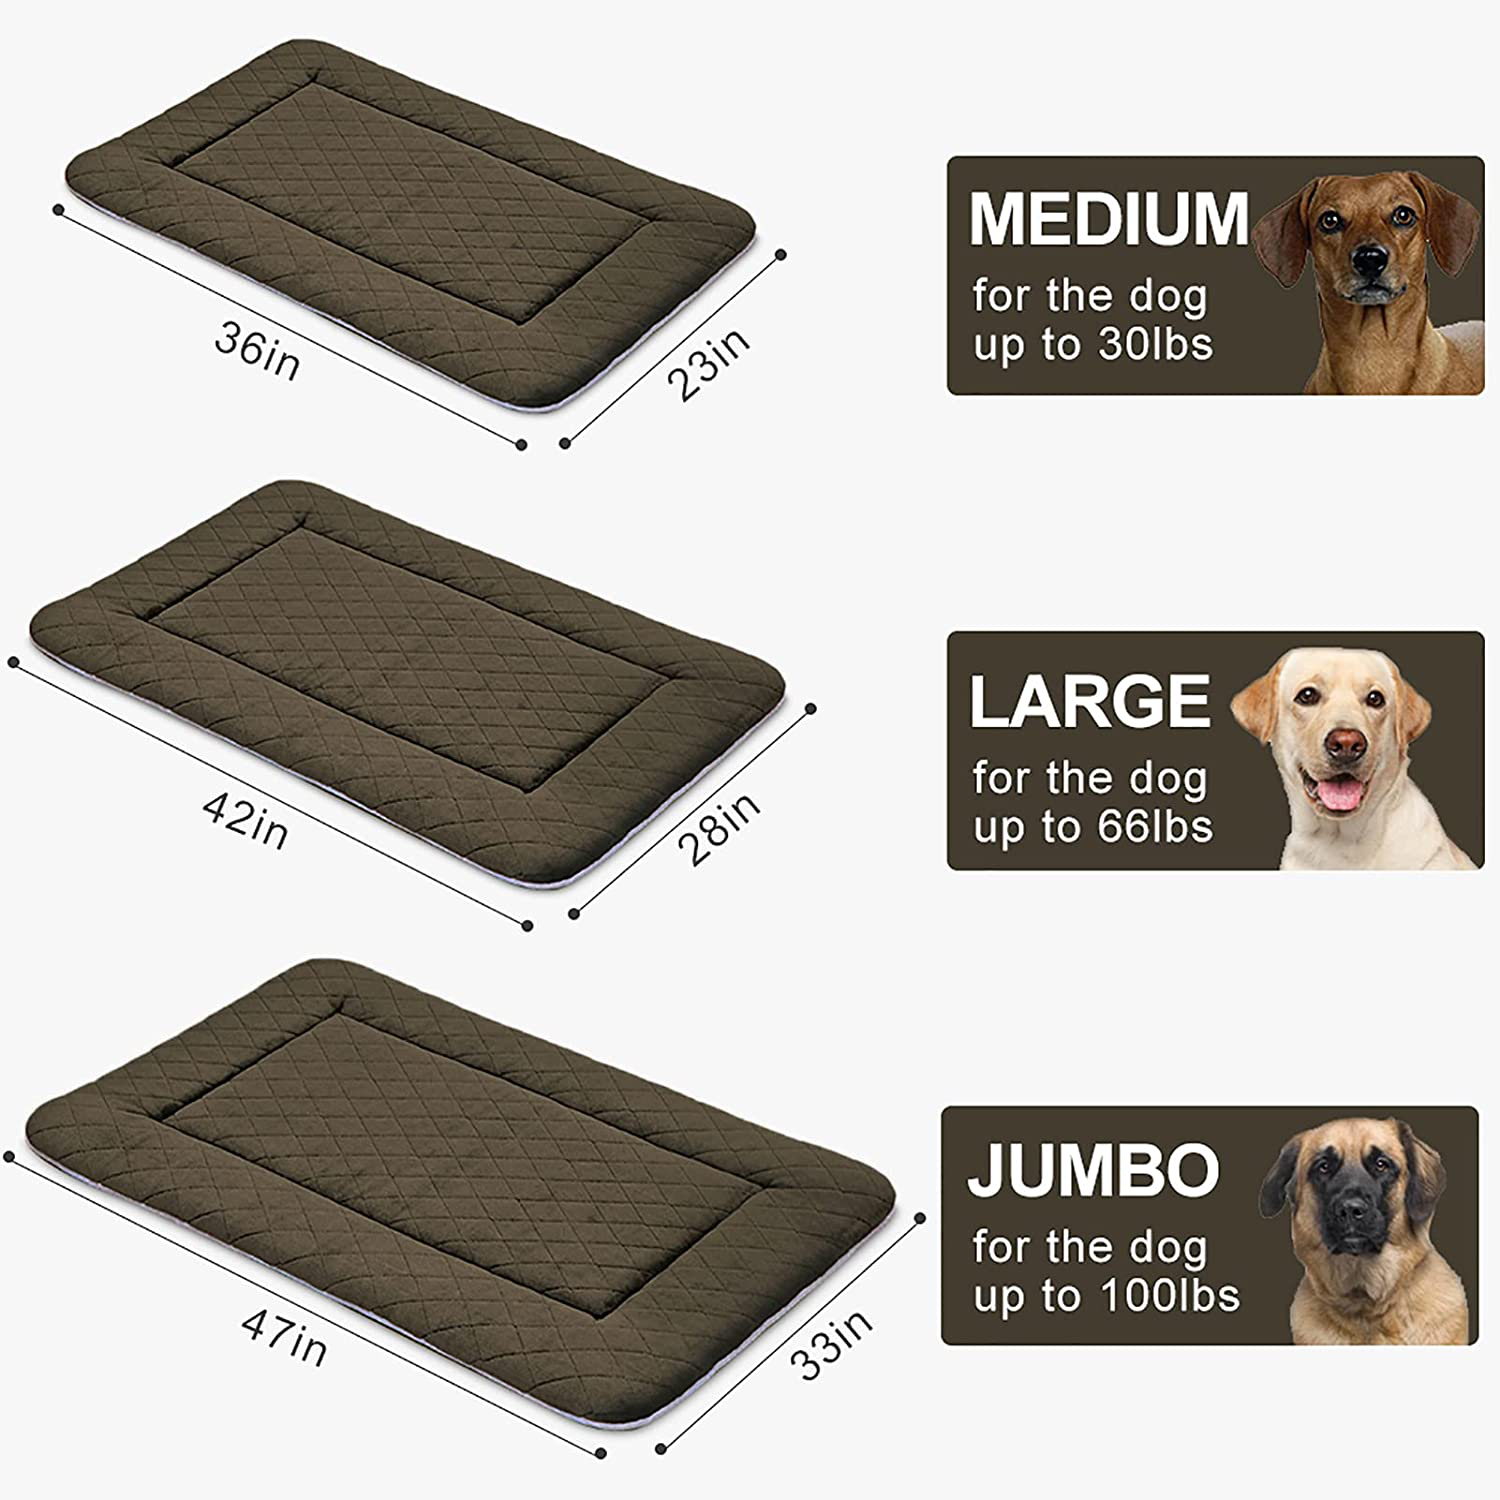 Hero Dog Large Dog Bed Crate Mat Crate Pad Pet Beds for Medium, Large, and Extra Large Dogs, Machine Washable Diamond Dog Sleeping Mattress with Non-Slip Bottom, Multi Colors